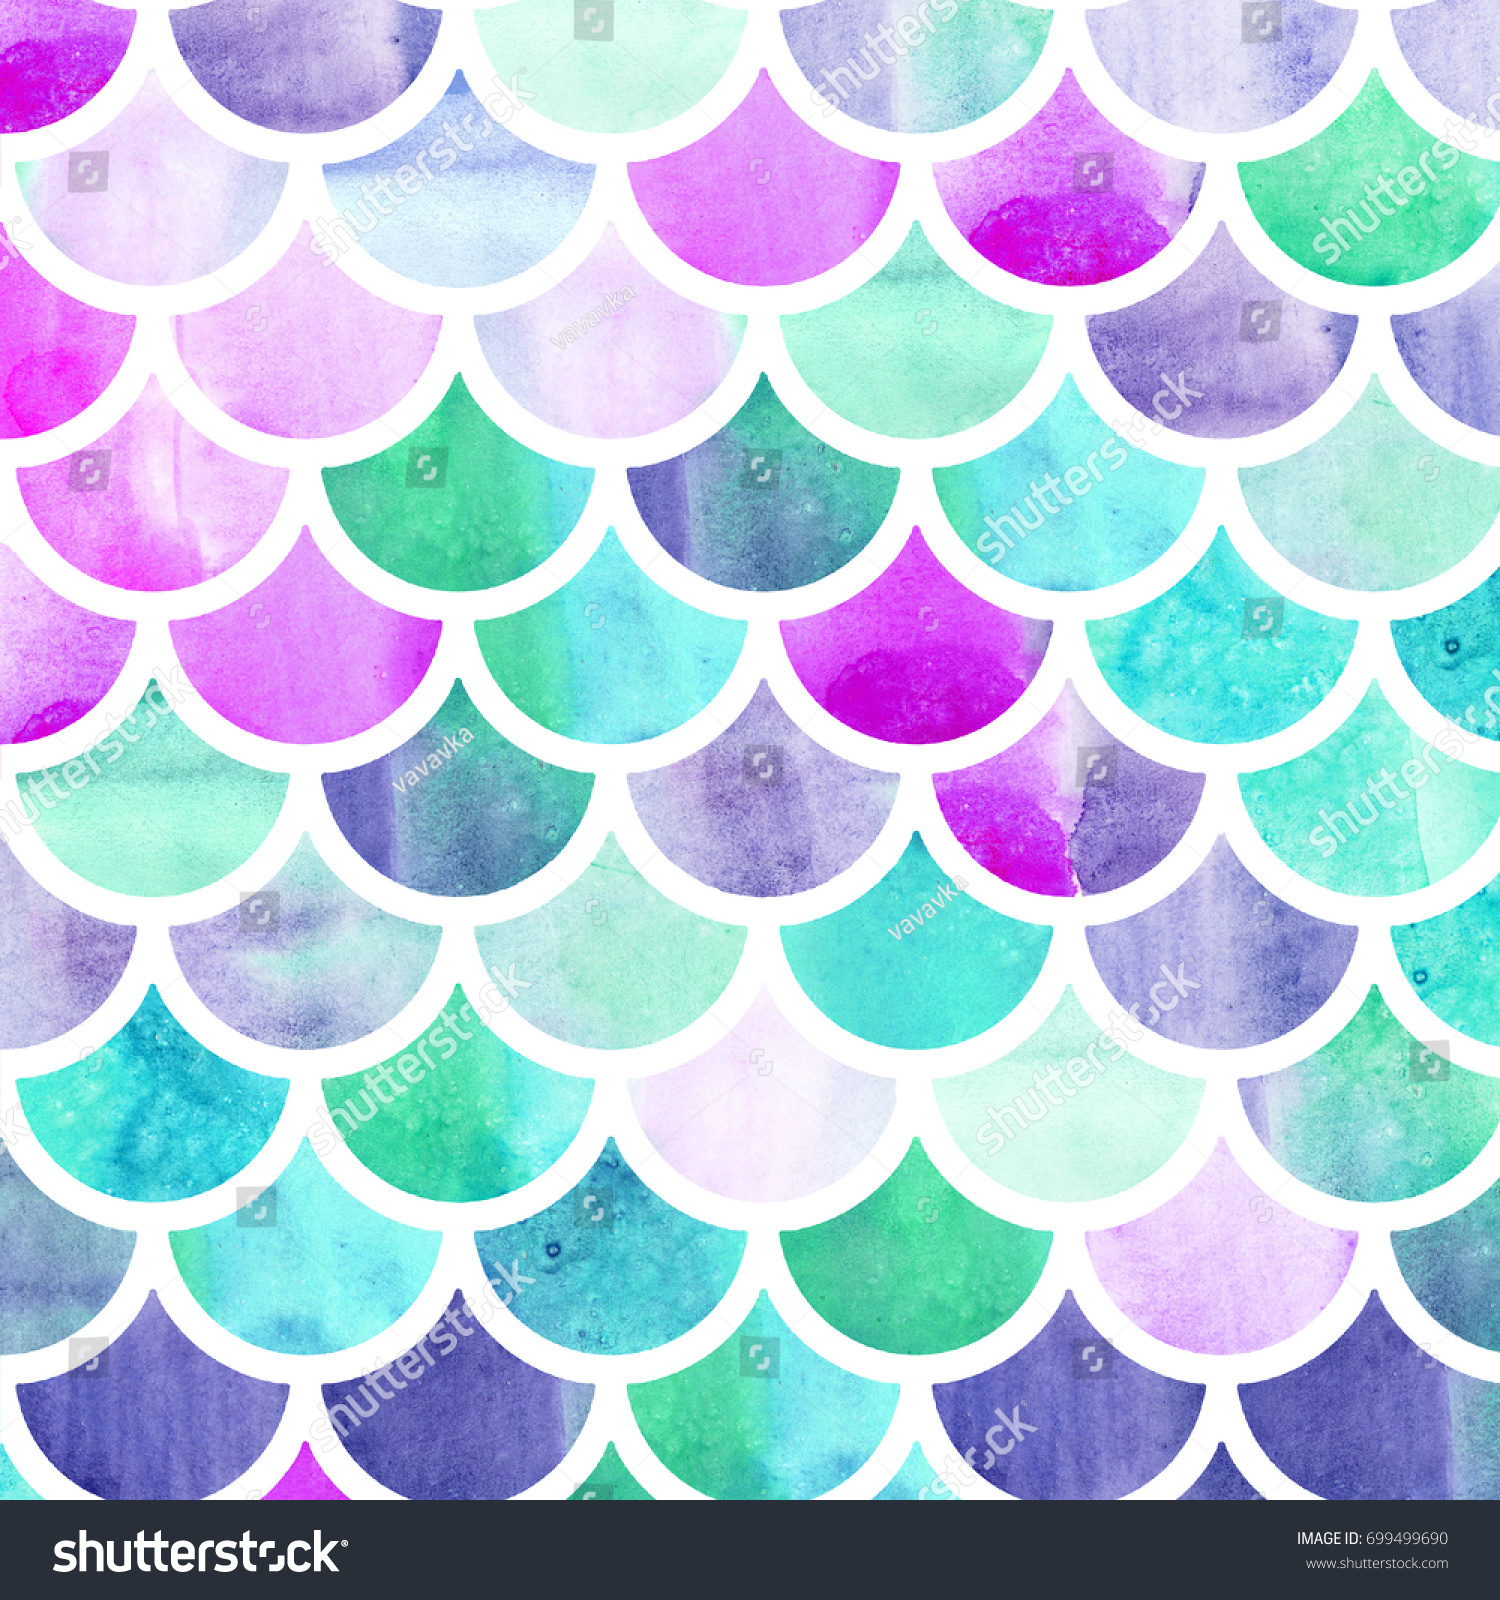 Mermaid Scales Watercolor Fish Scales Bright Stock Illustration ...